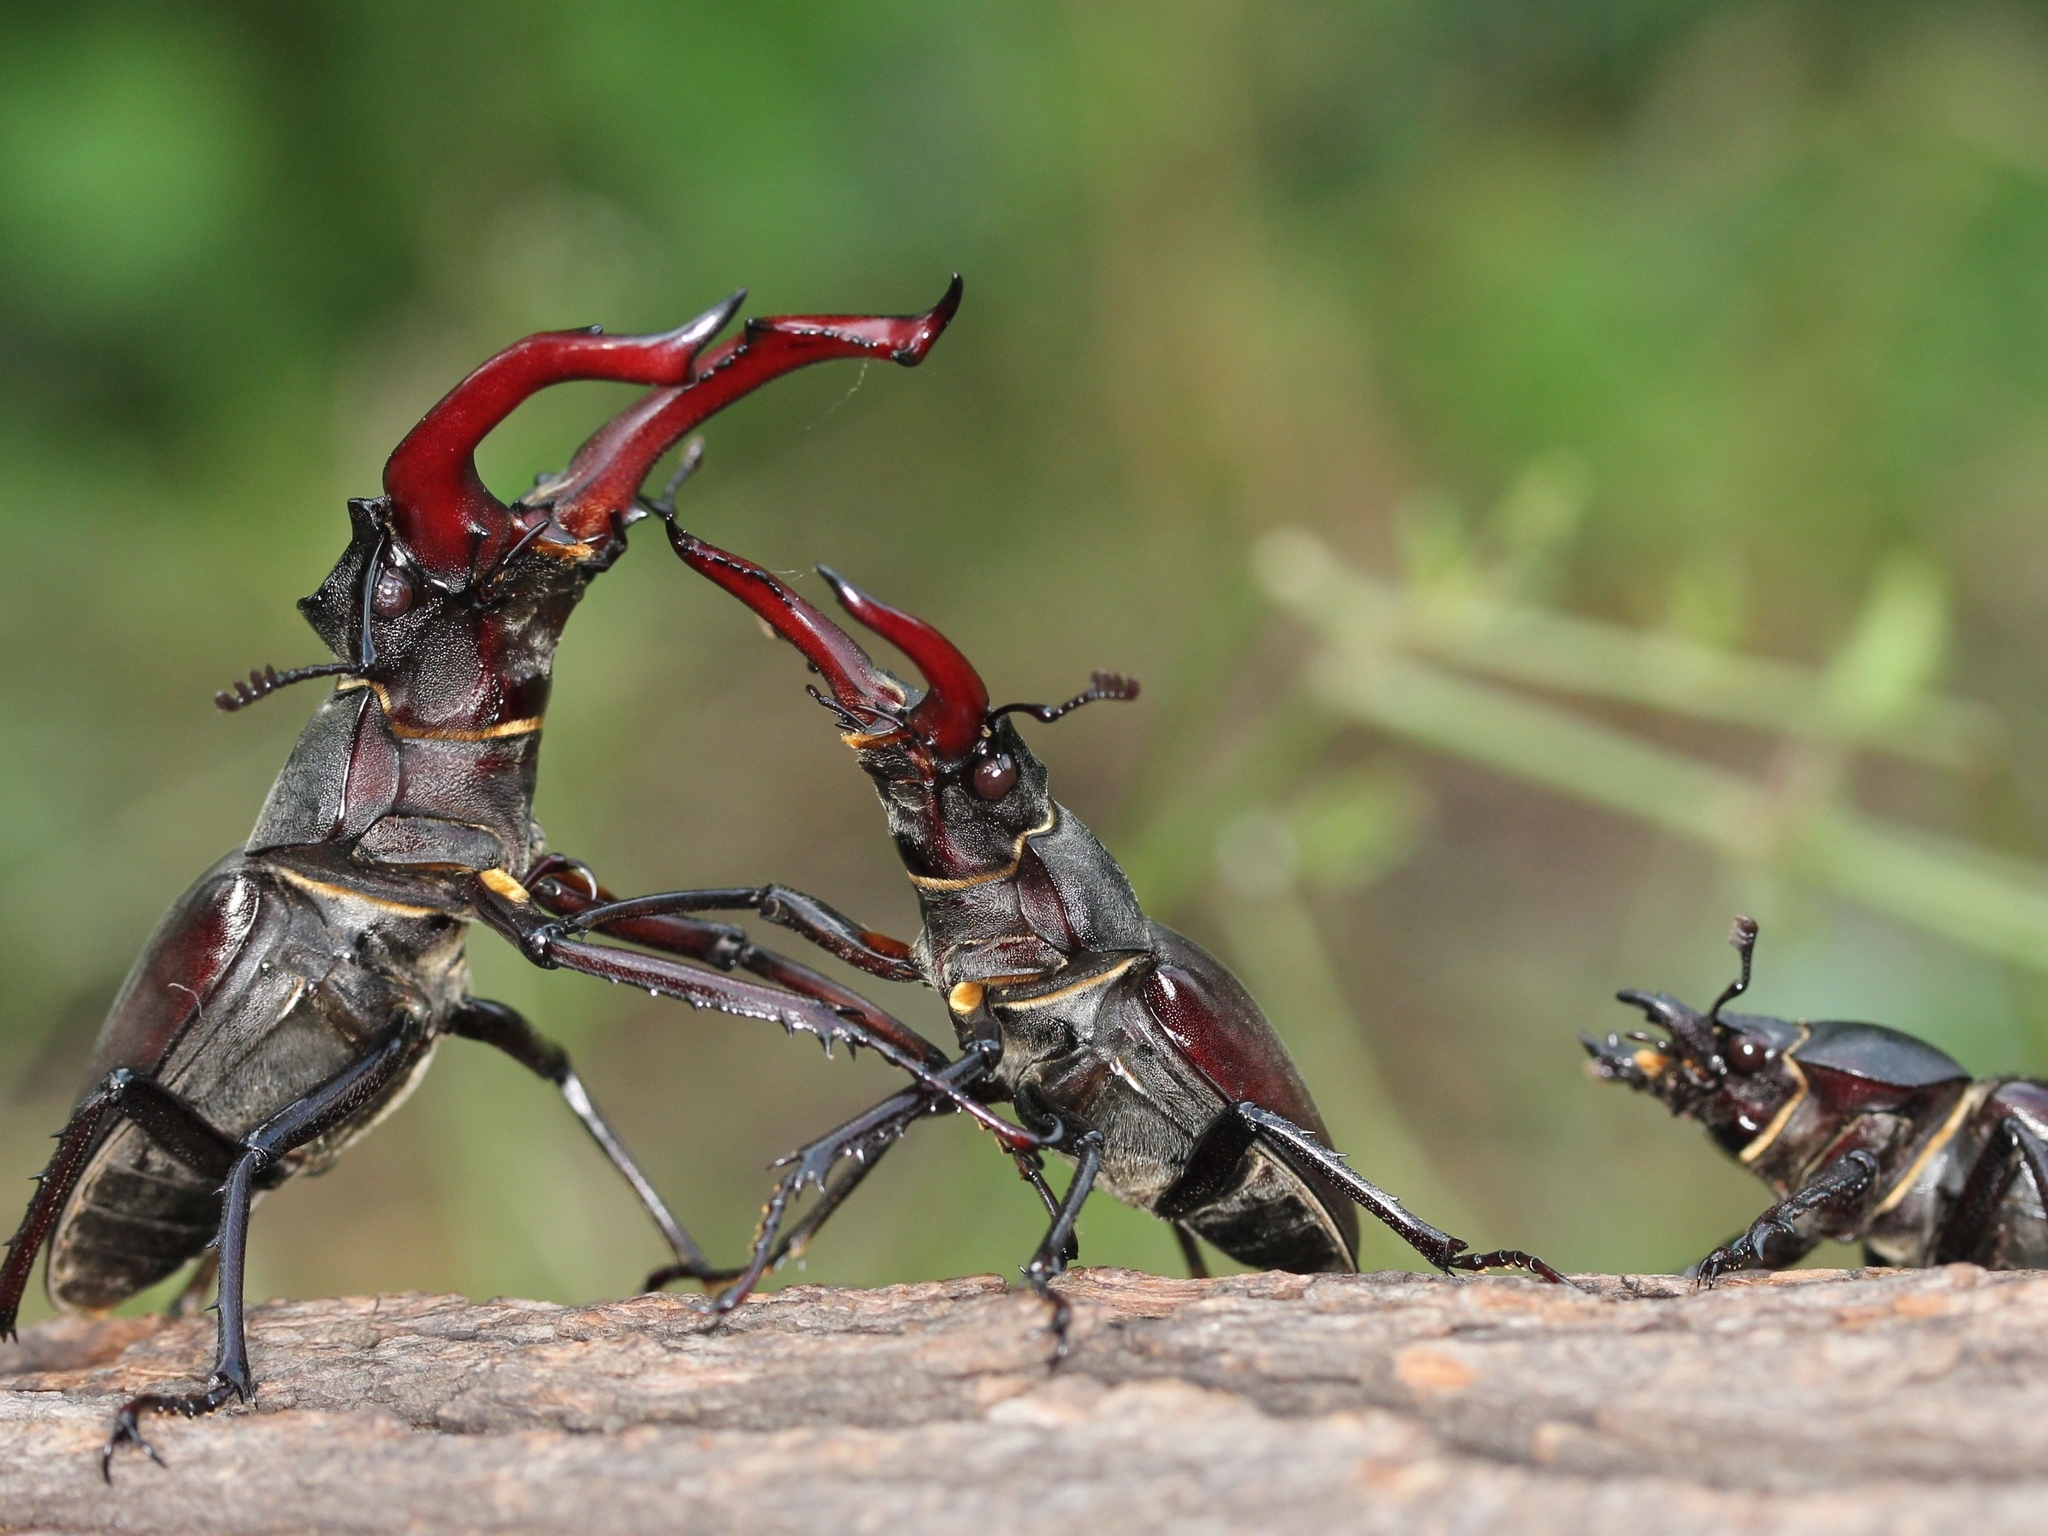 Image: Stag beetle, insects, fight, fight